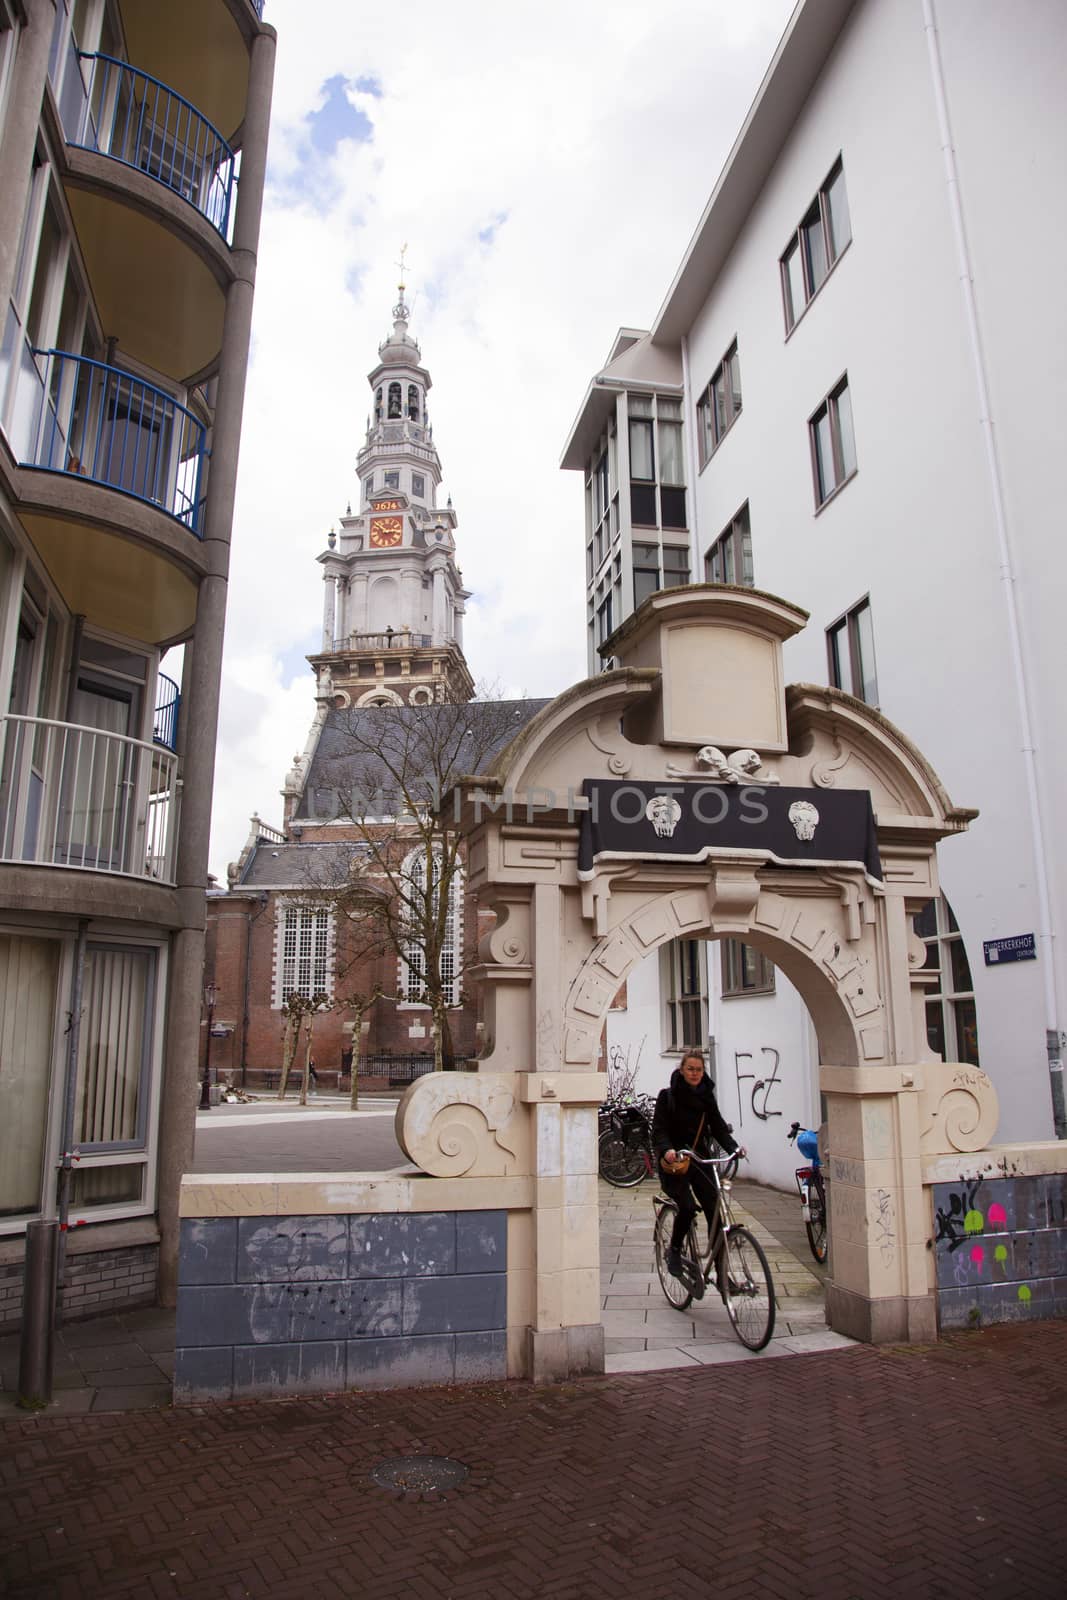 old church tower of Zuiderkerk with porch and bicycle in Amsterdam